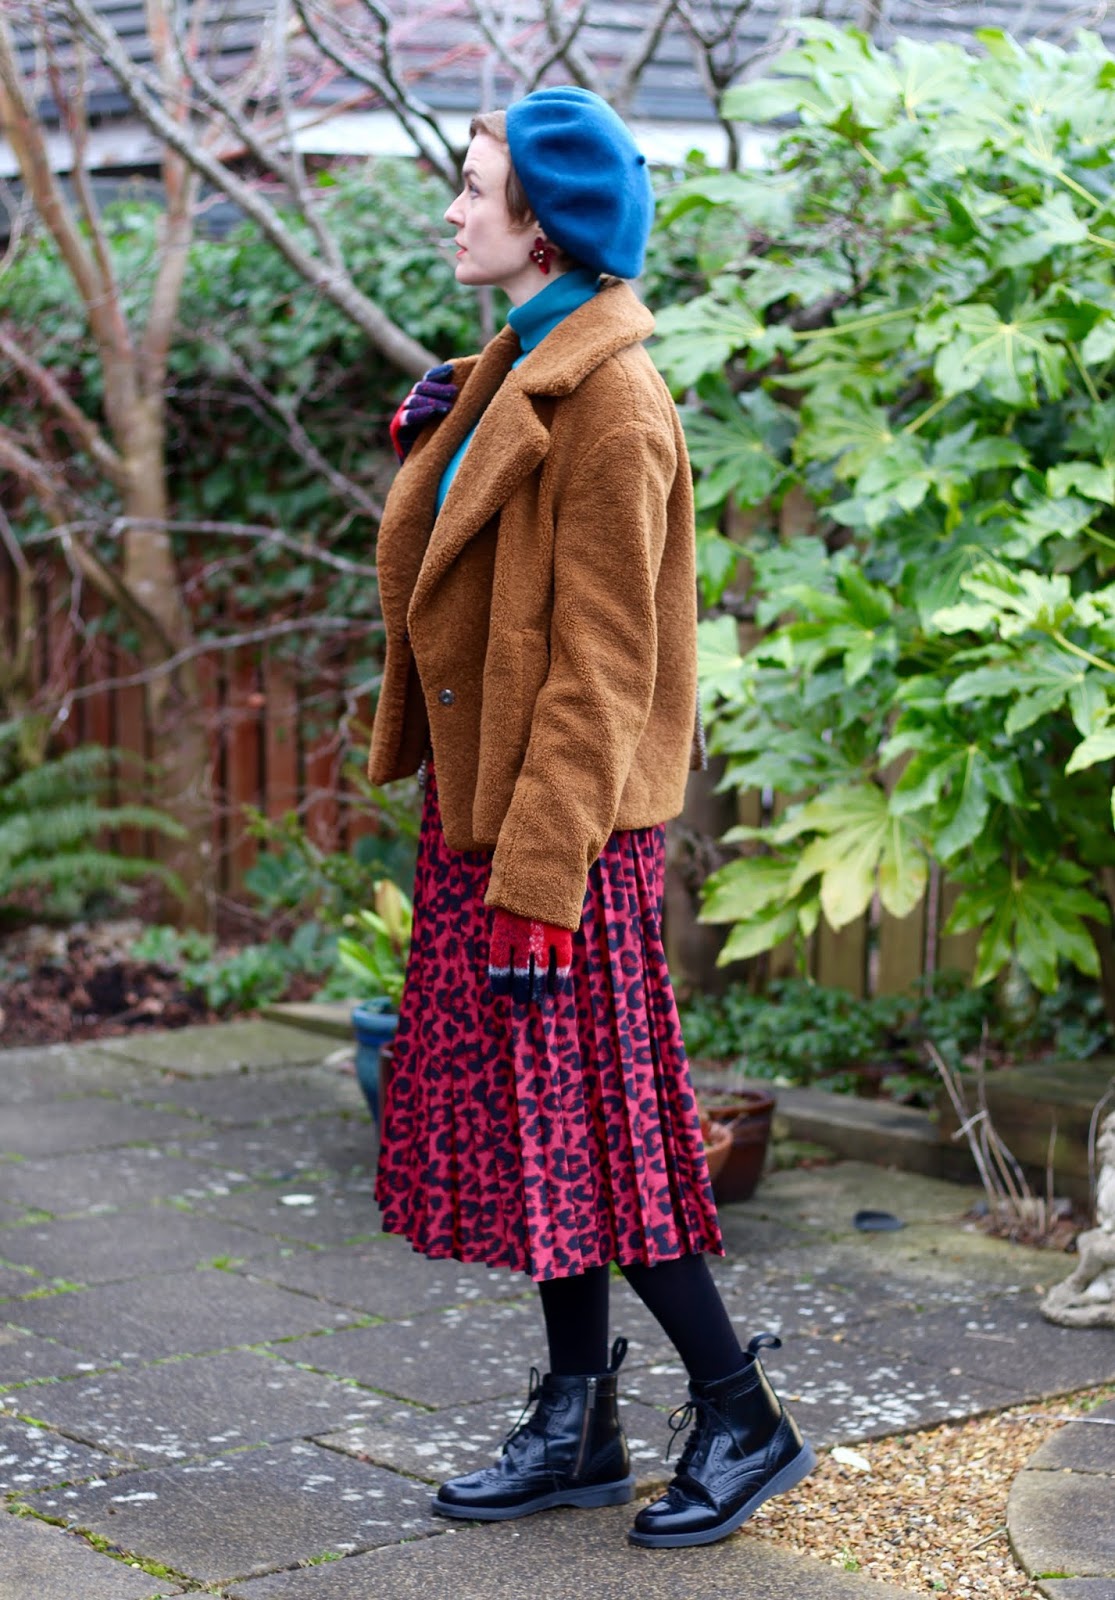 Brown teddy Jacket and red leopard skirt | Fake Fabulous | Winter Outfit